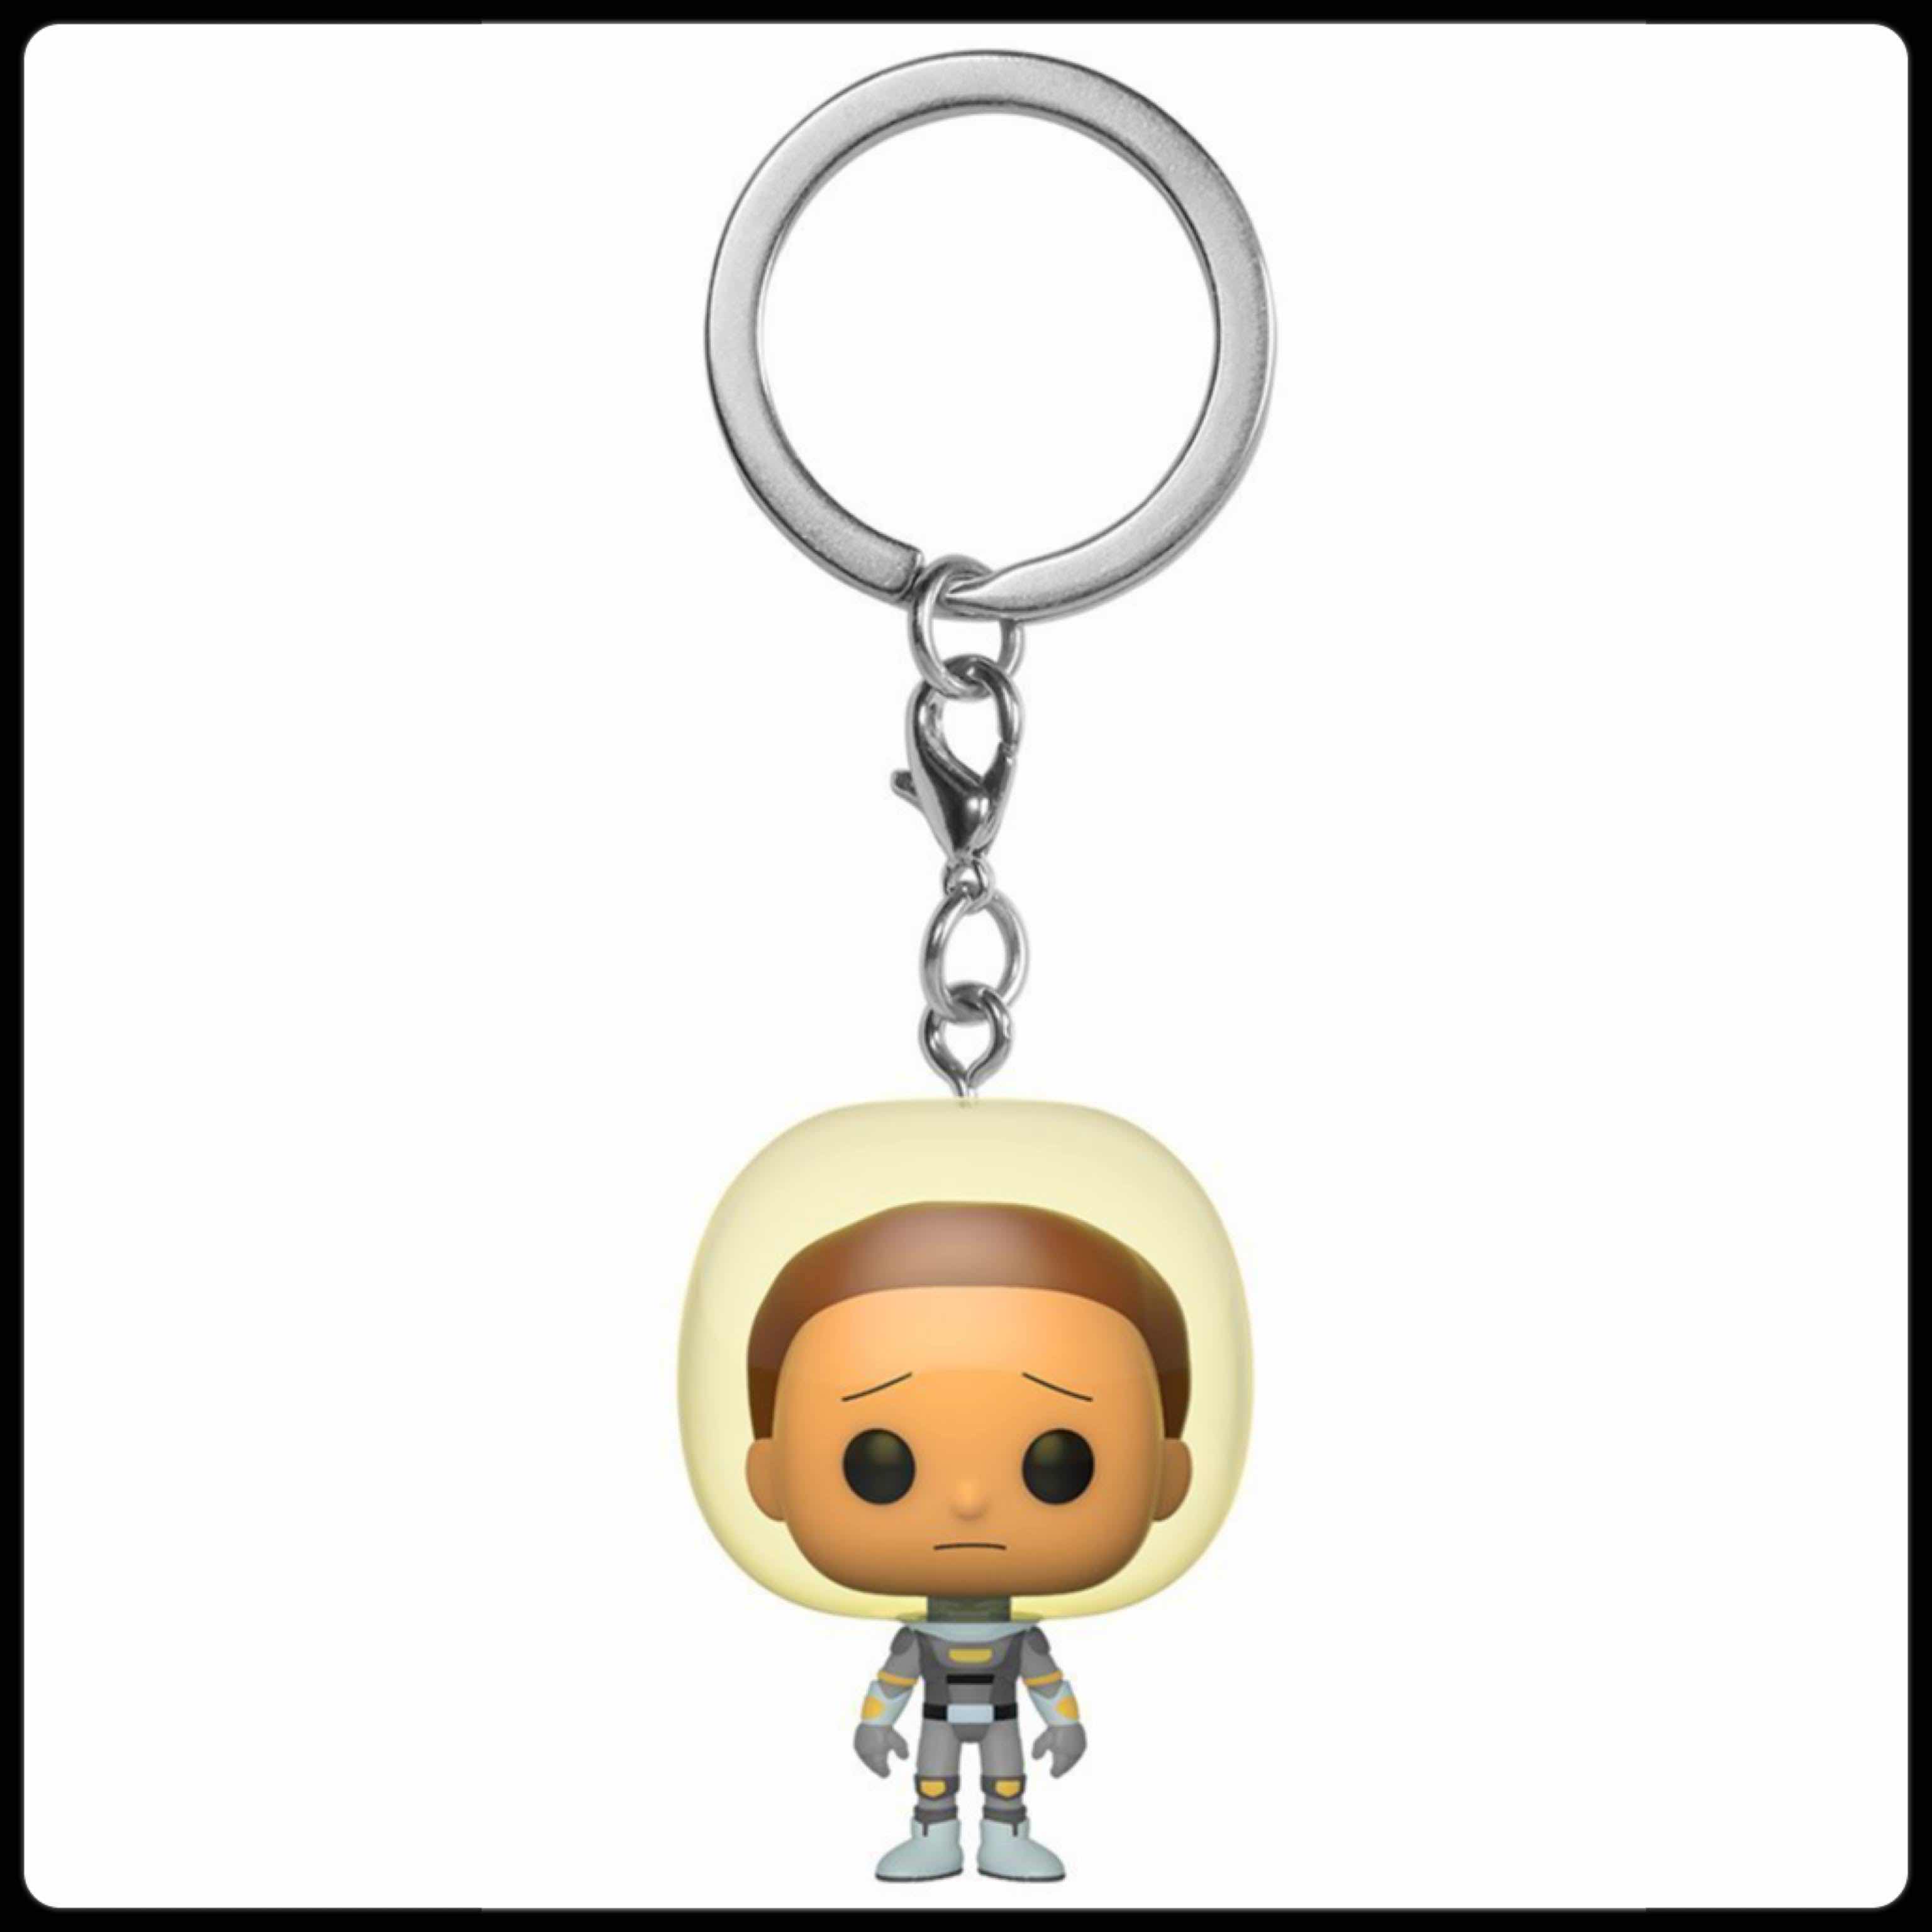 Photo 2 of NEW FUNKO POP! POCKET POP! VINYL FIGURE KEYCHAIN, RICK AND MORTY “SPACE SUIT MORTY” (8-PACK)